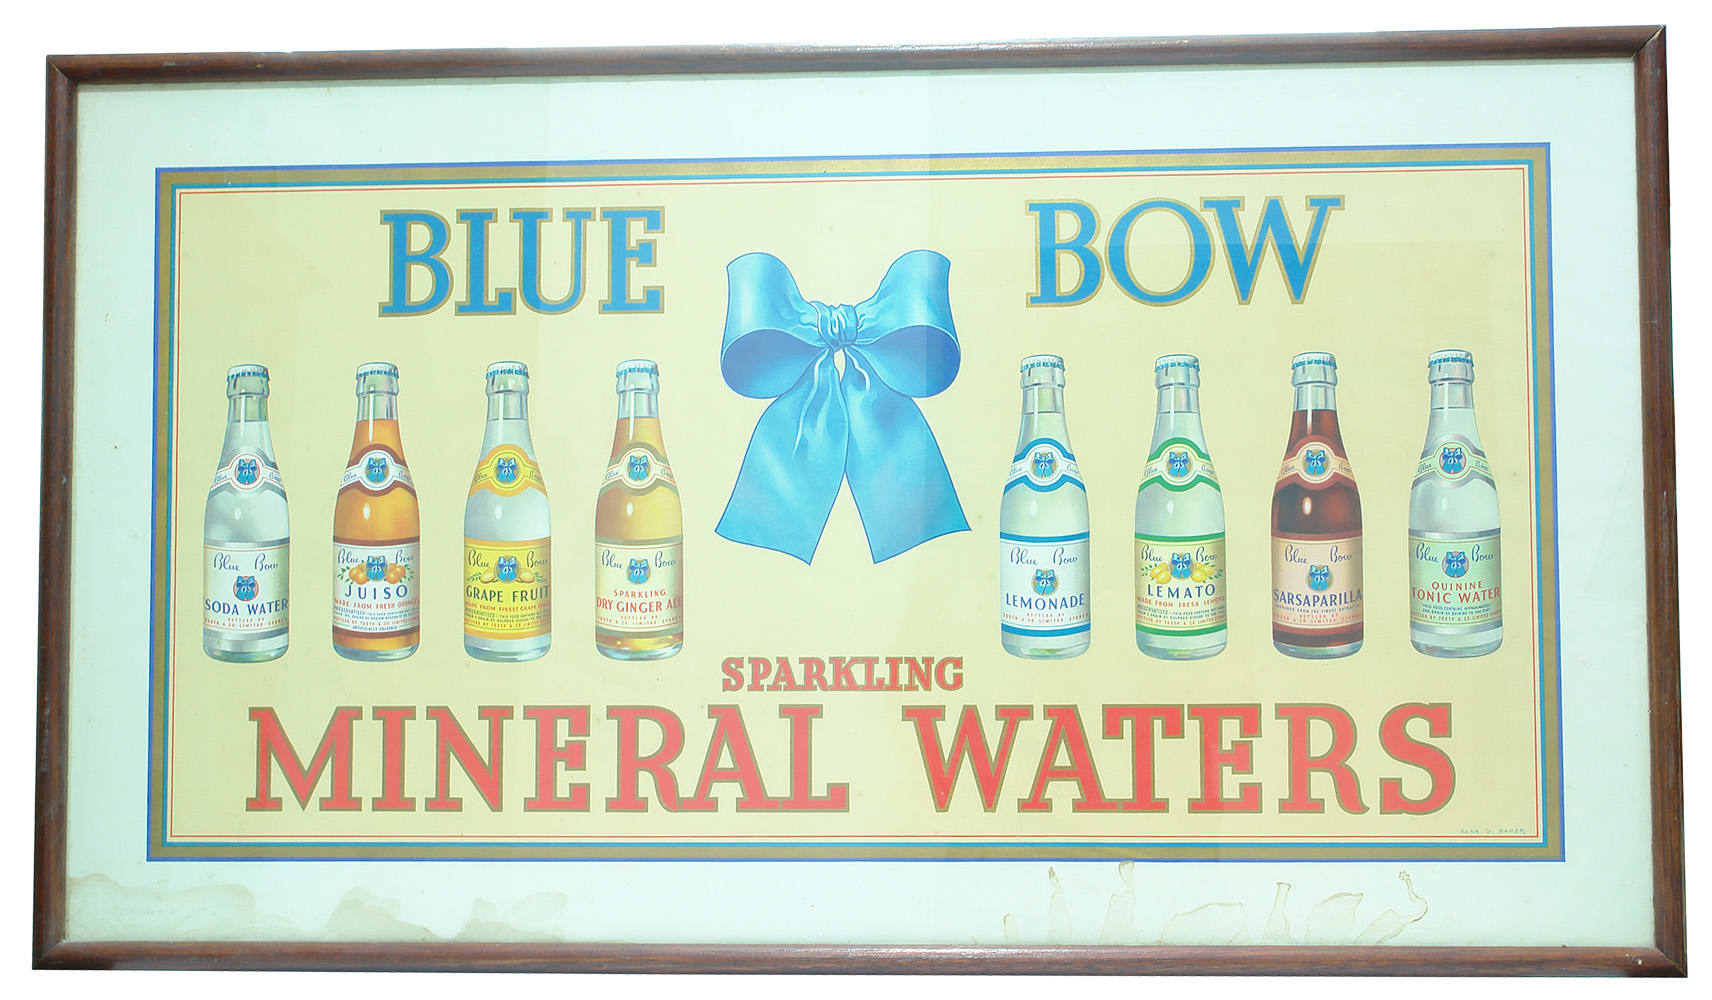 Blue Bow Mineral Waters Sydney Advertising Poster